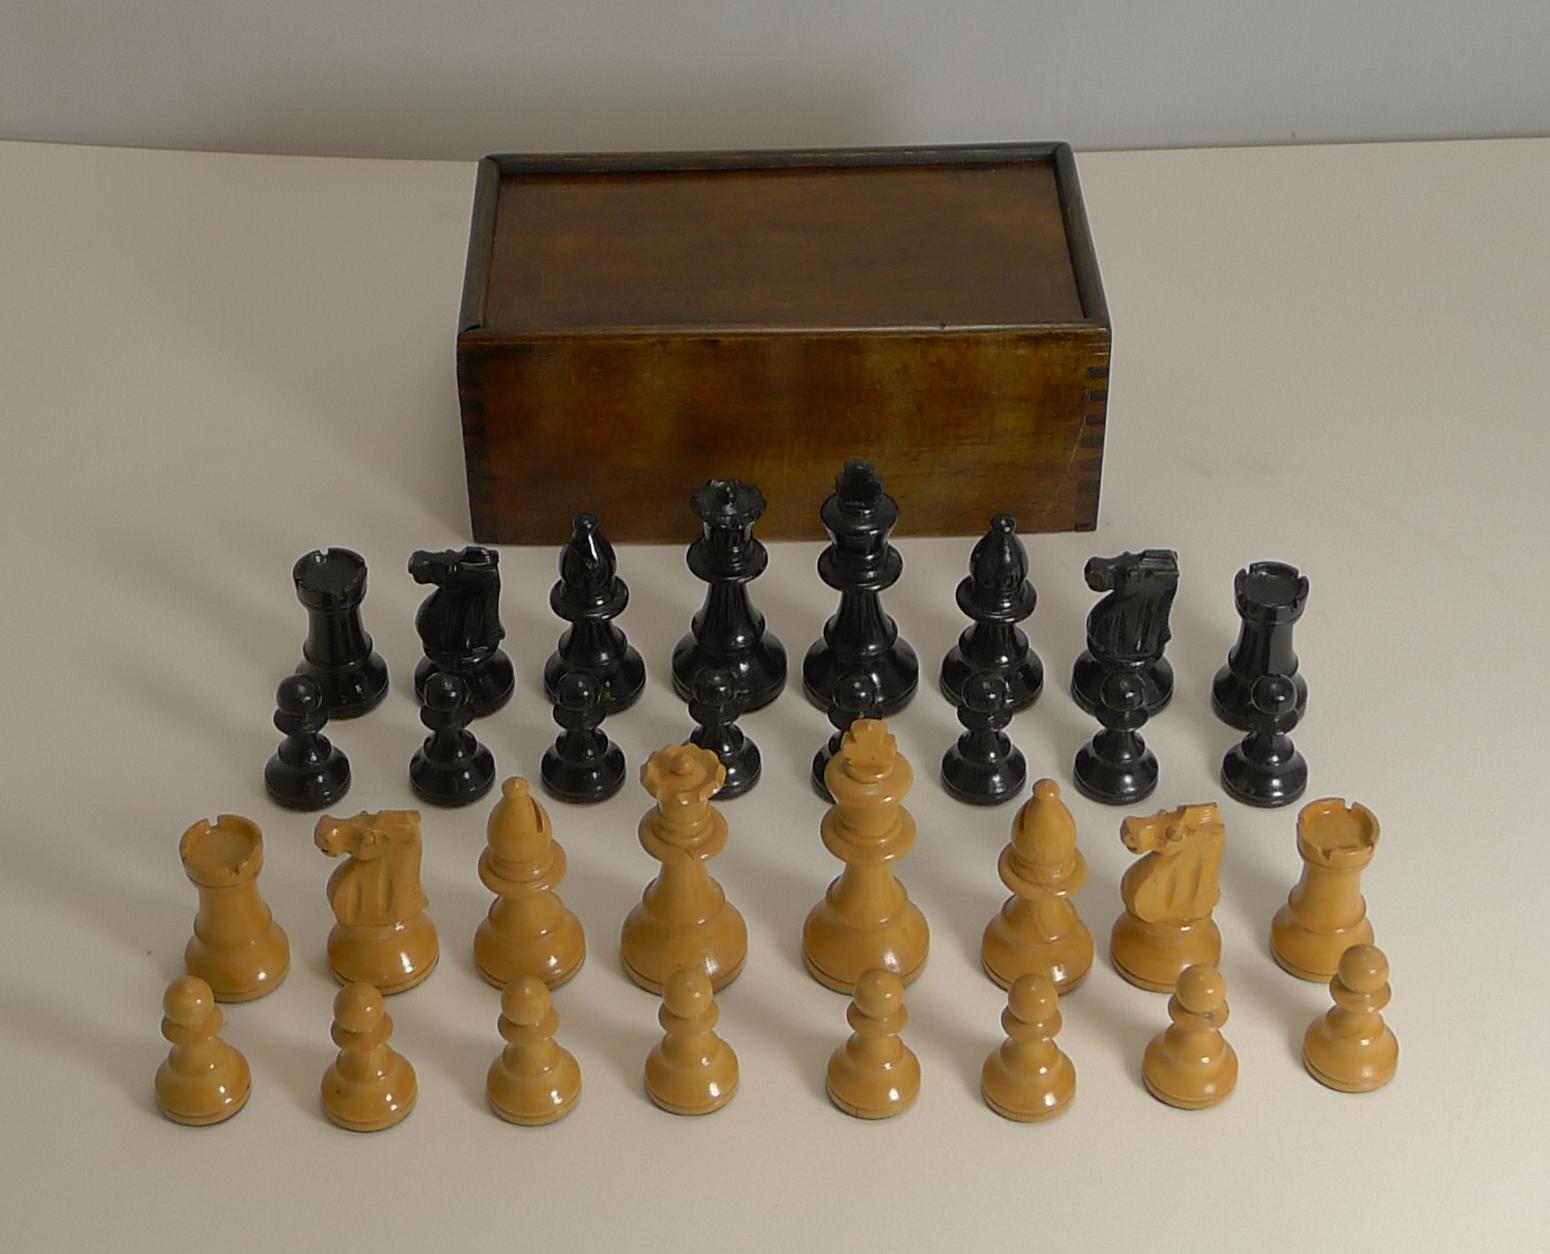 Early 20th Century Antique English Chess Board and Chess Set, circa 1910